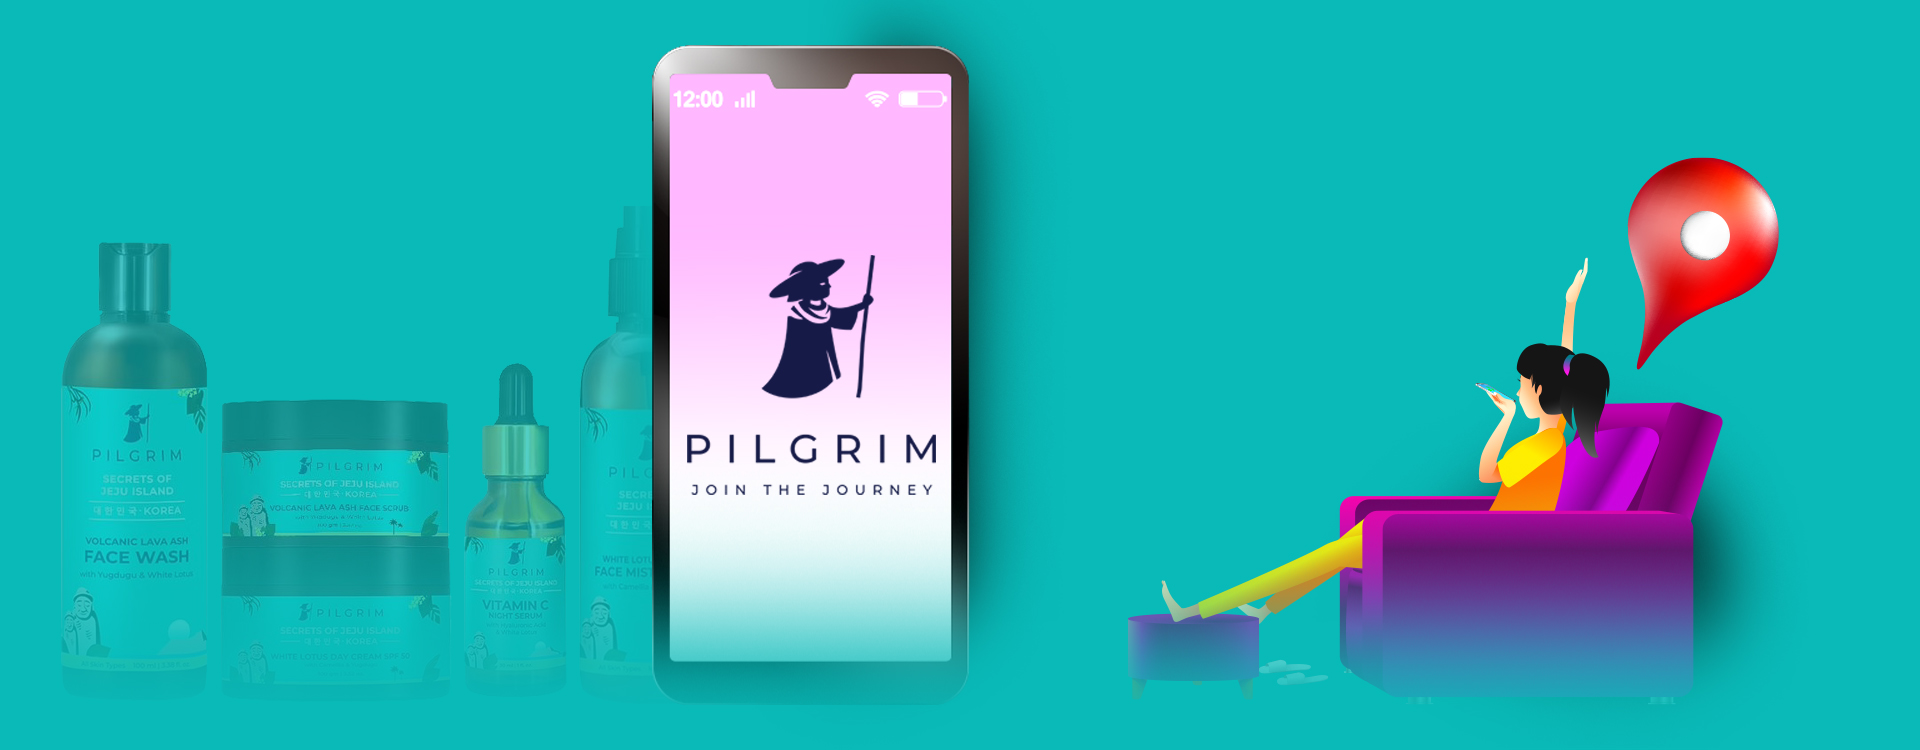 5 things that new businesses can learn from Pilgrim a newly launched D2C beauty brand in the pandemic.